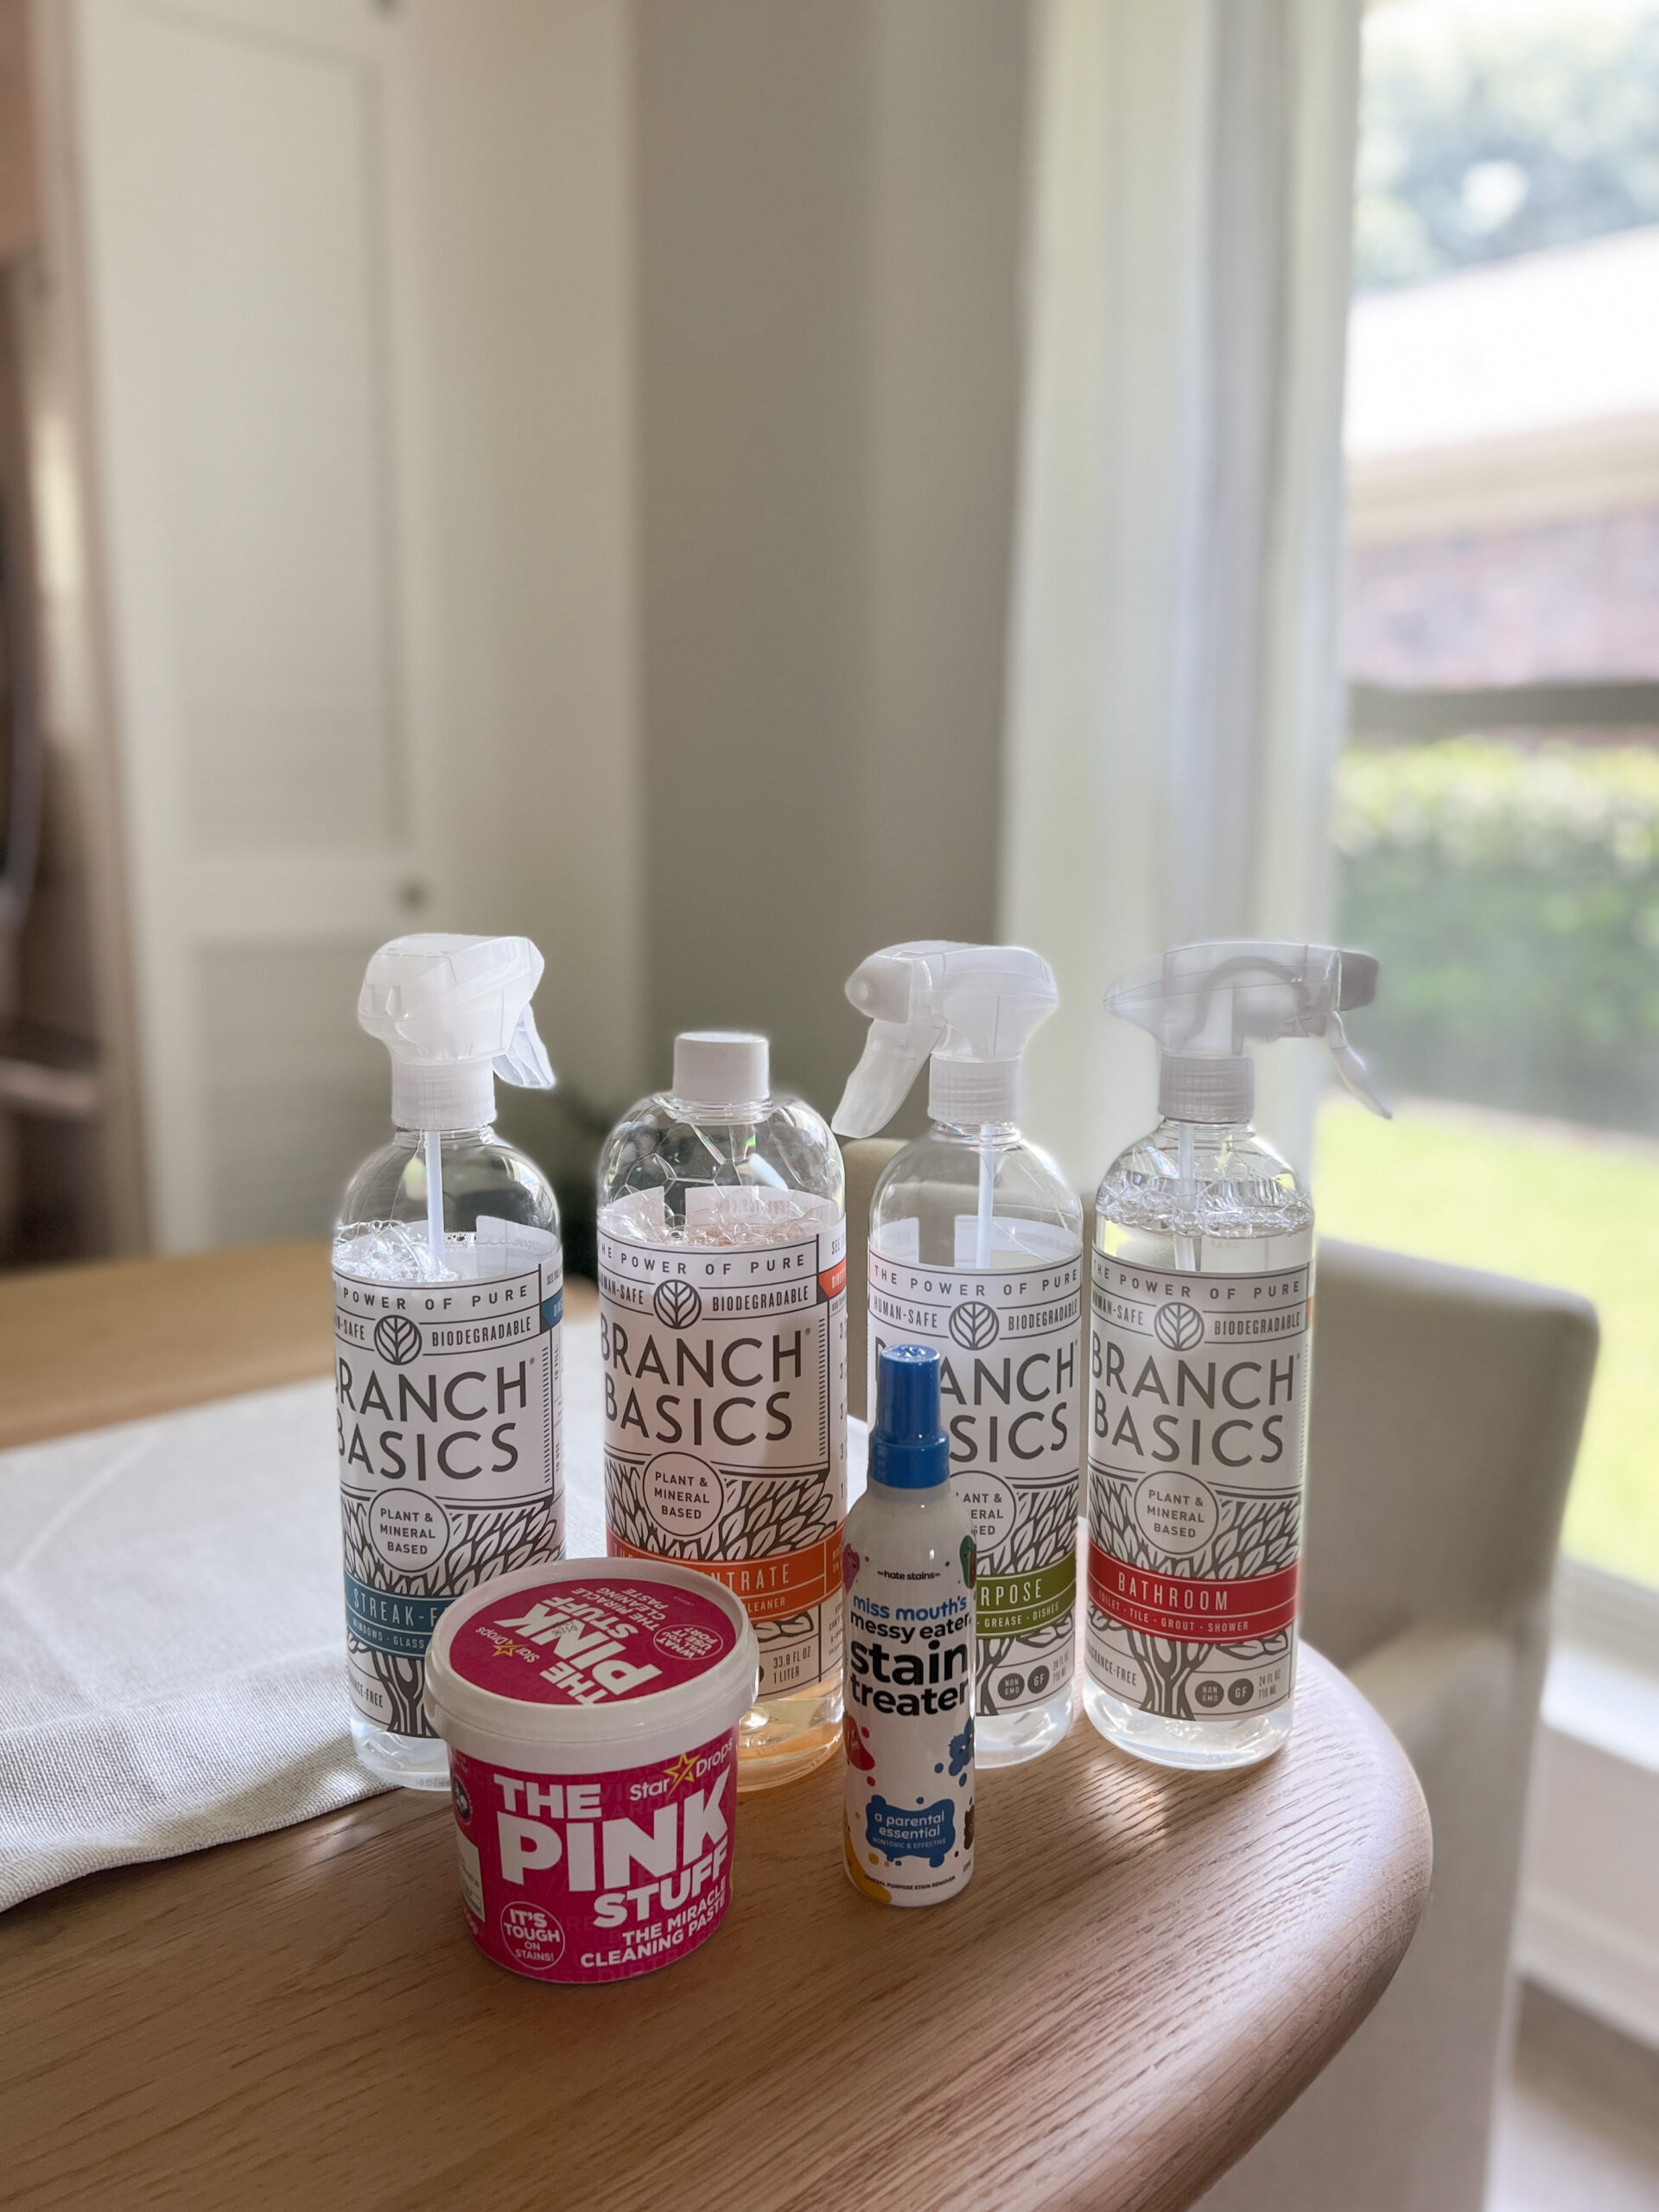 Non Toxic Cleaning and Laundry Supplies I Love in my Household | Branch Basics cleaning